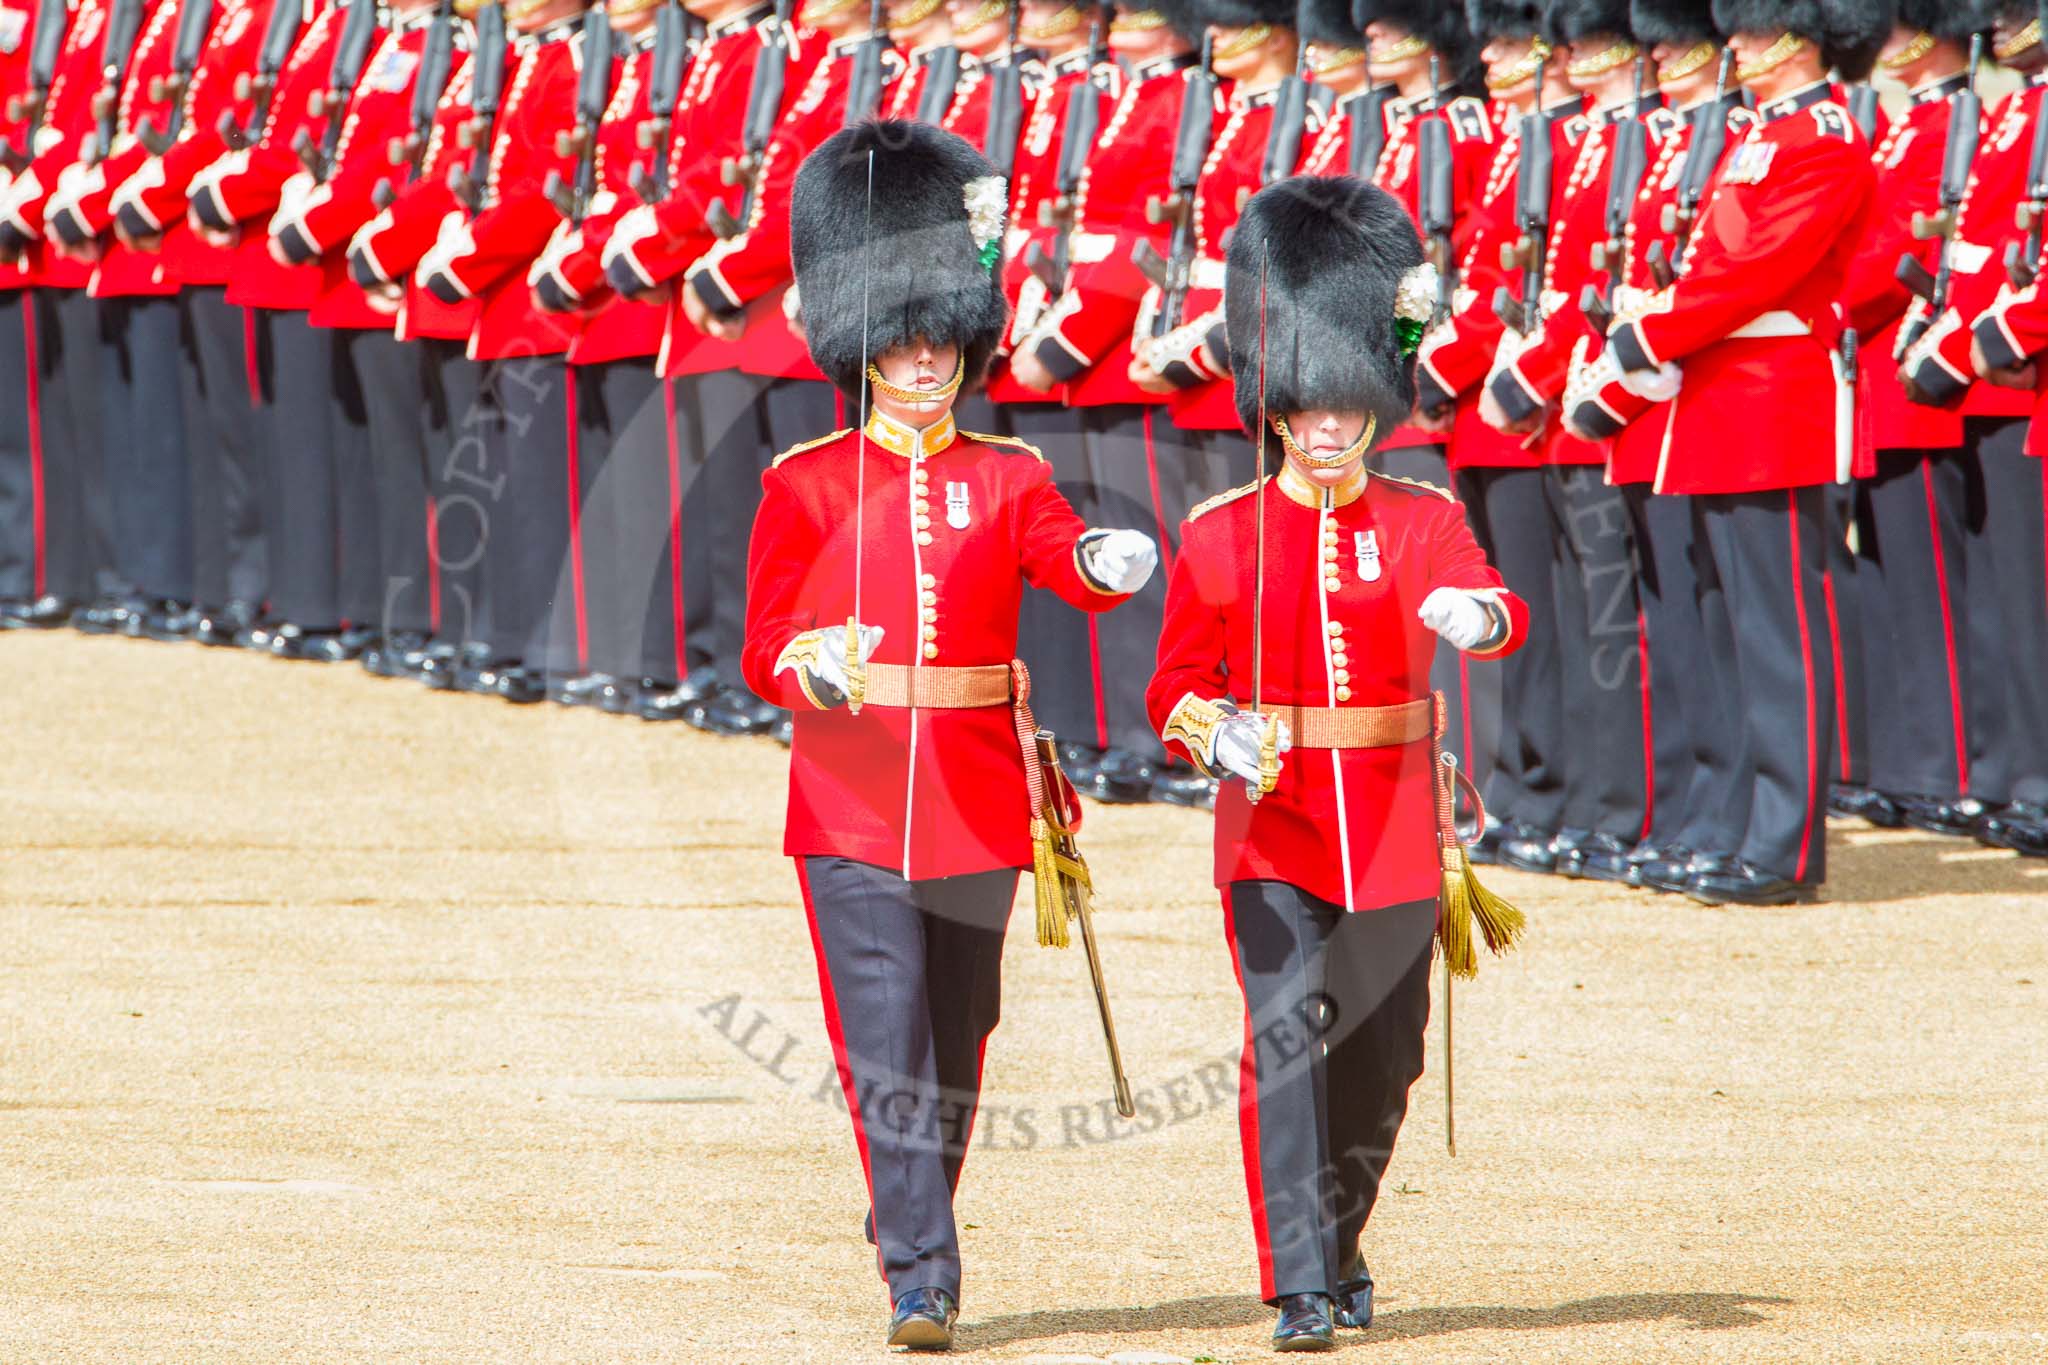 Trooping the Colour 2013: The Subaltern of No. 1 Guard, Captain F O Lloyd-George, and the Subaltern of No. 2 Guard, Captain B Bardsley, are marching together to Horse Guards Arch. They will return later, with the other 16 officers, three for each guard. Image #120, 15 June 2013 10:33 Horse Guards Parade, London, UK